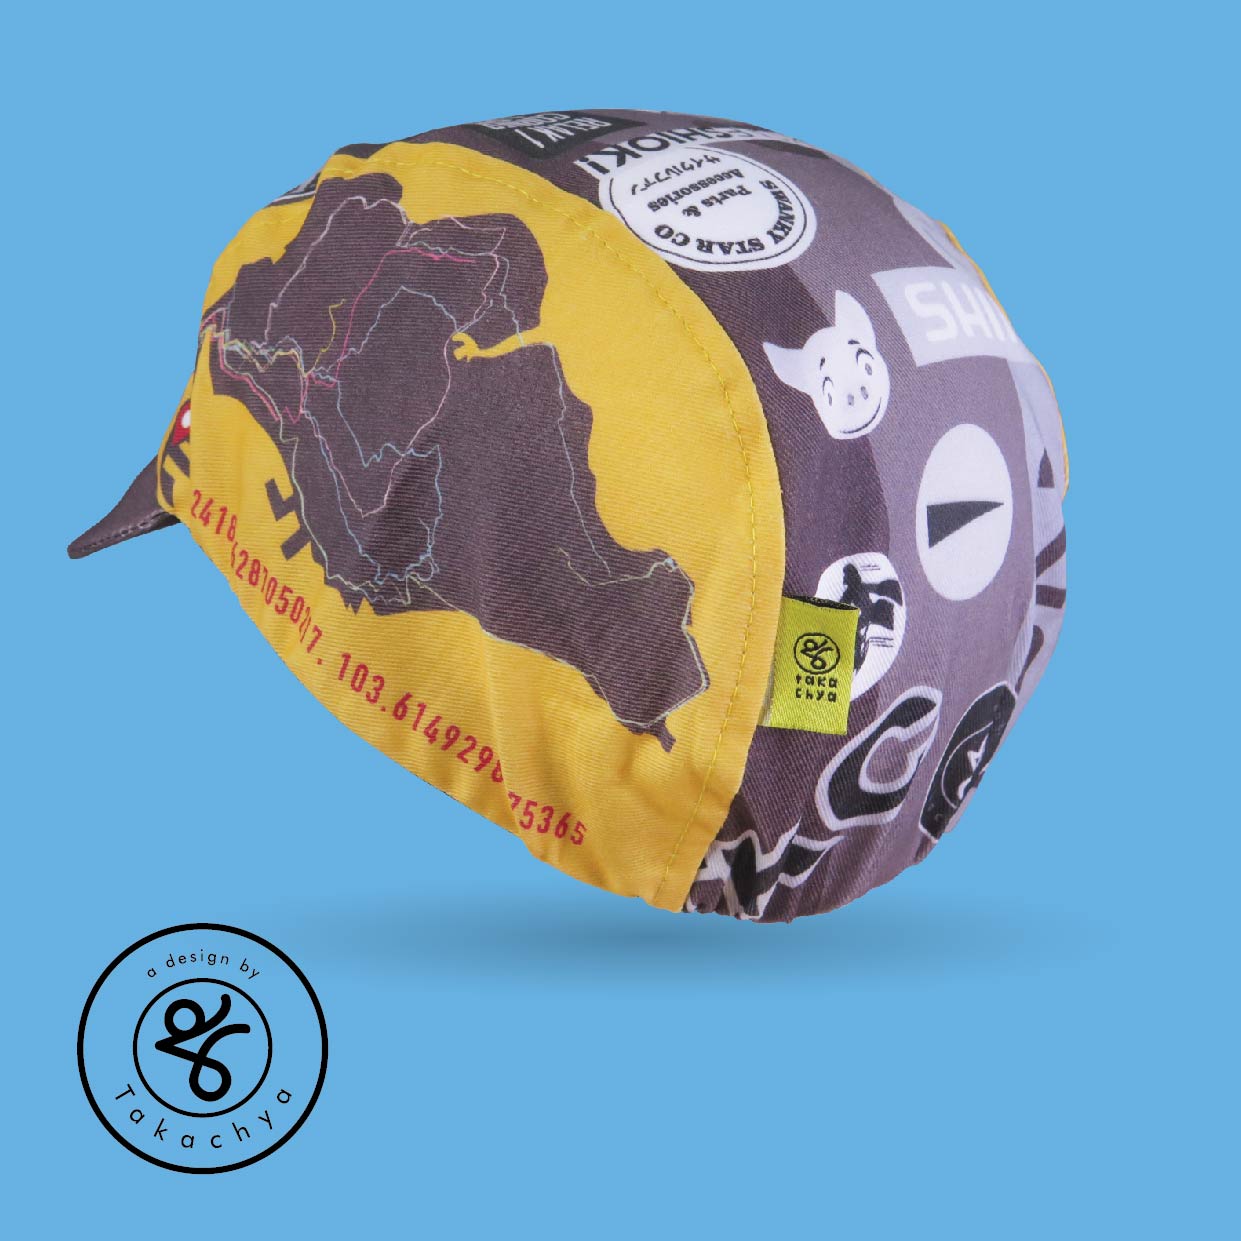 Mission To Tuas - Grayscale Yellow - A Design by Takachya Cycling Cap